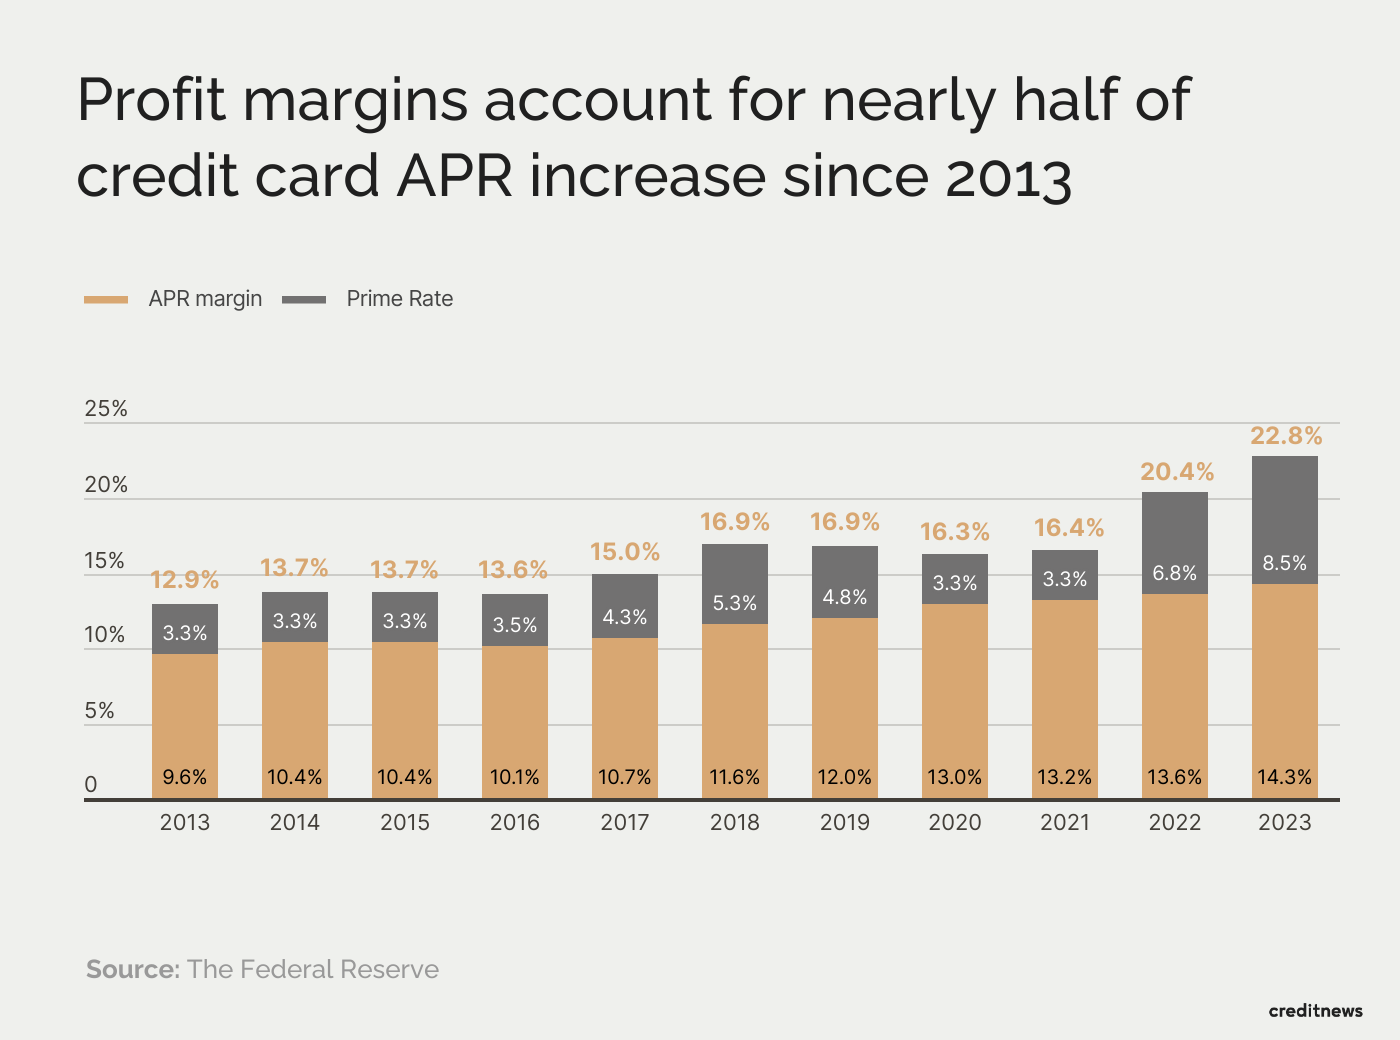 graph showing profit margins due to APR increases